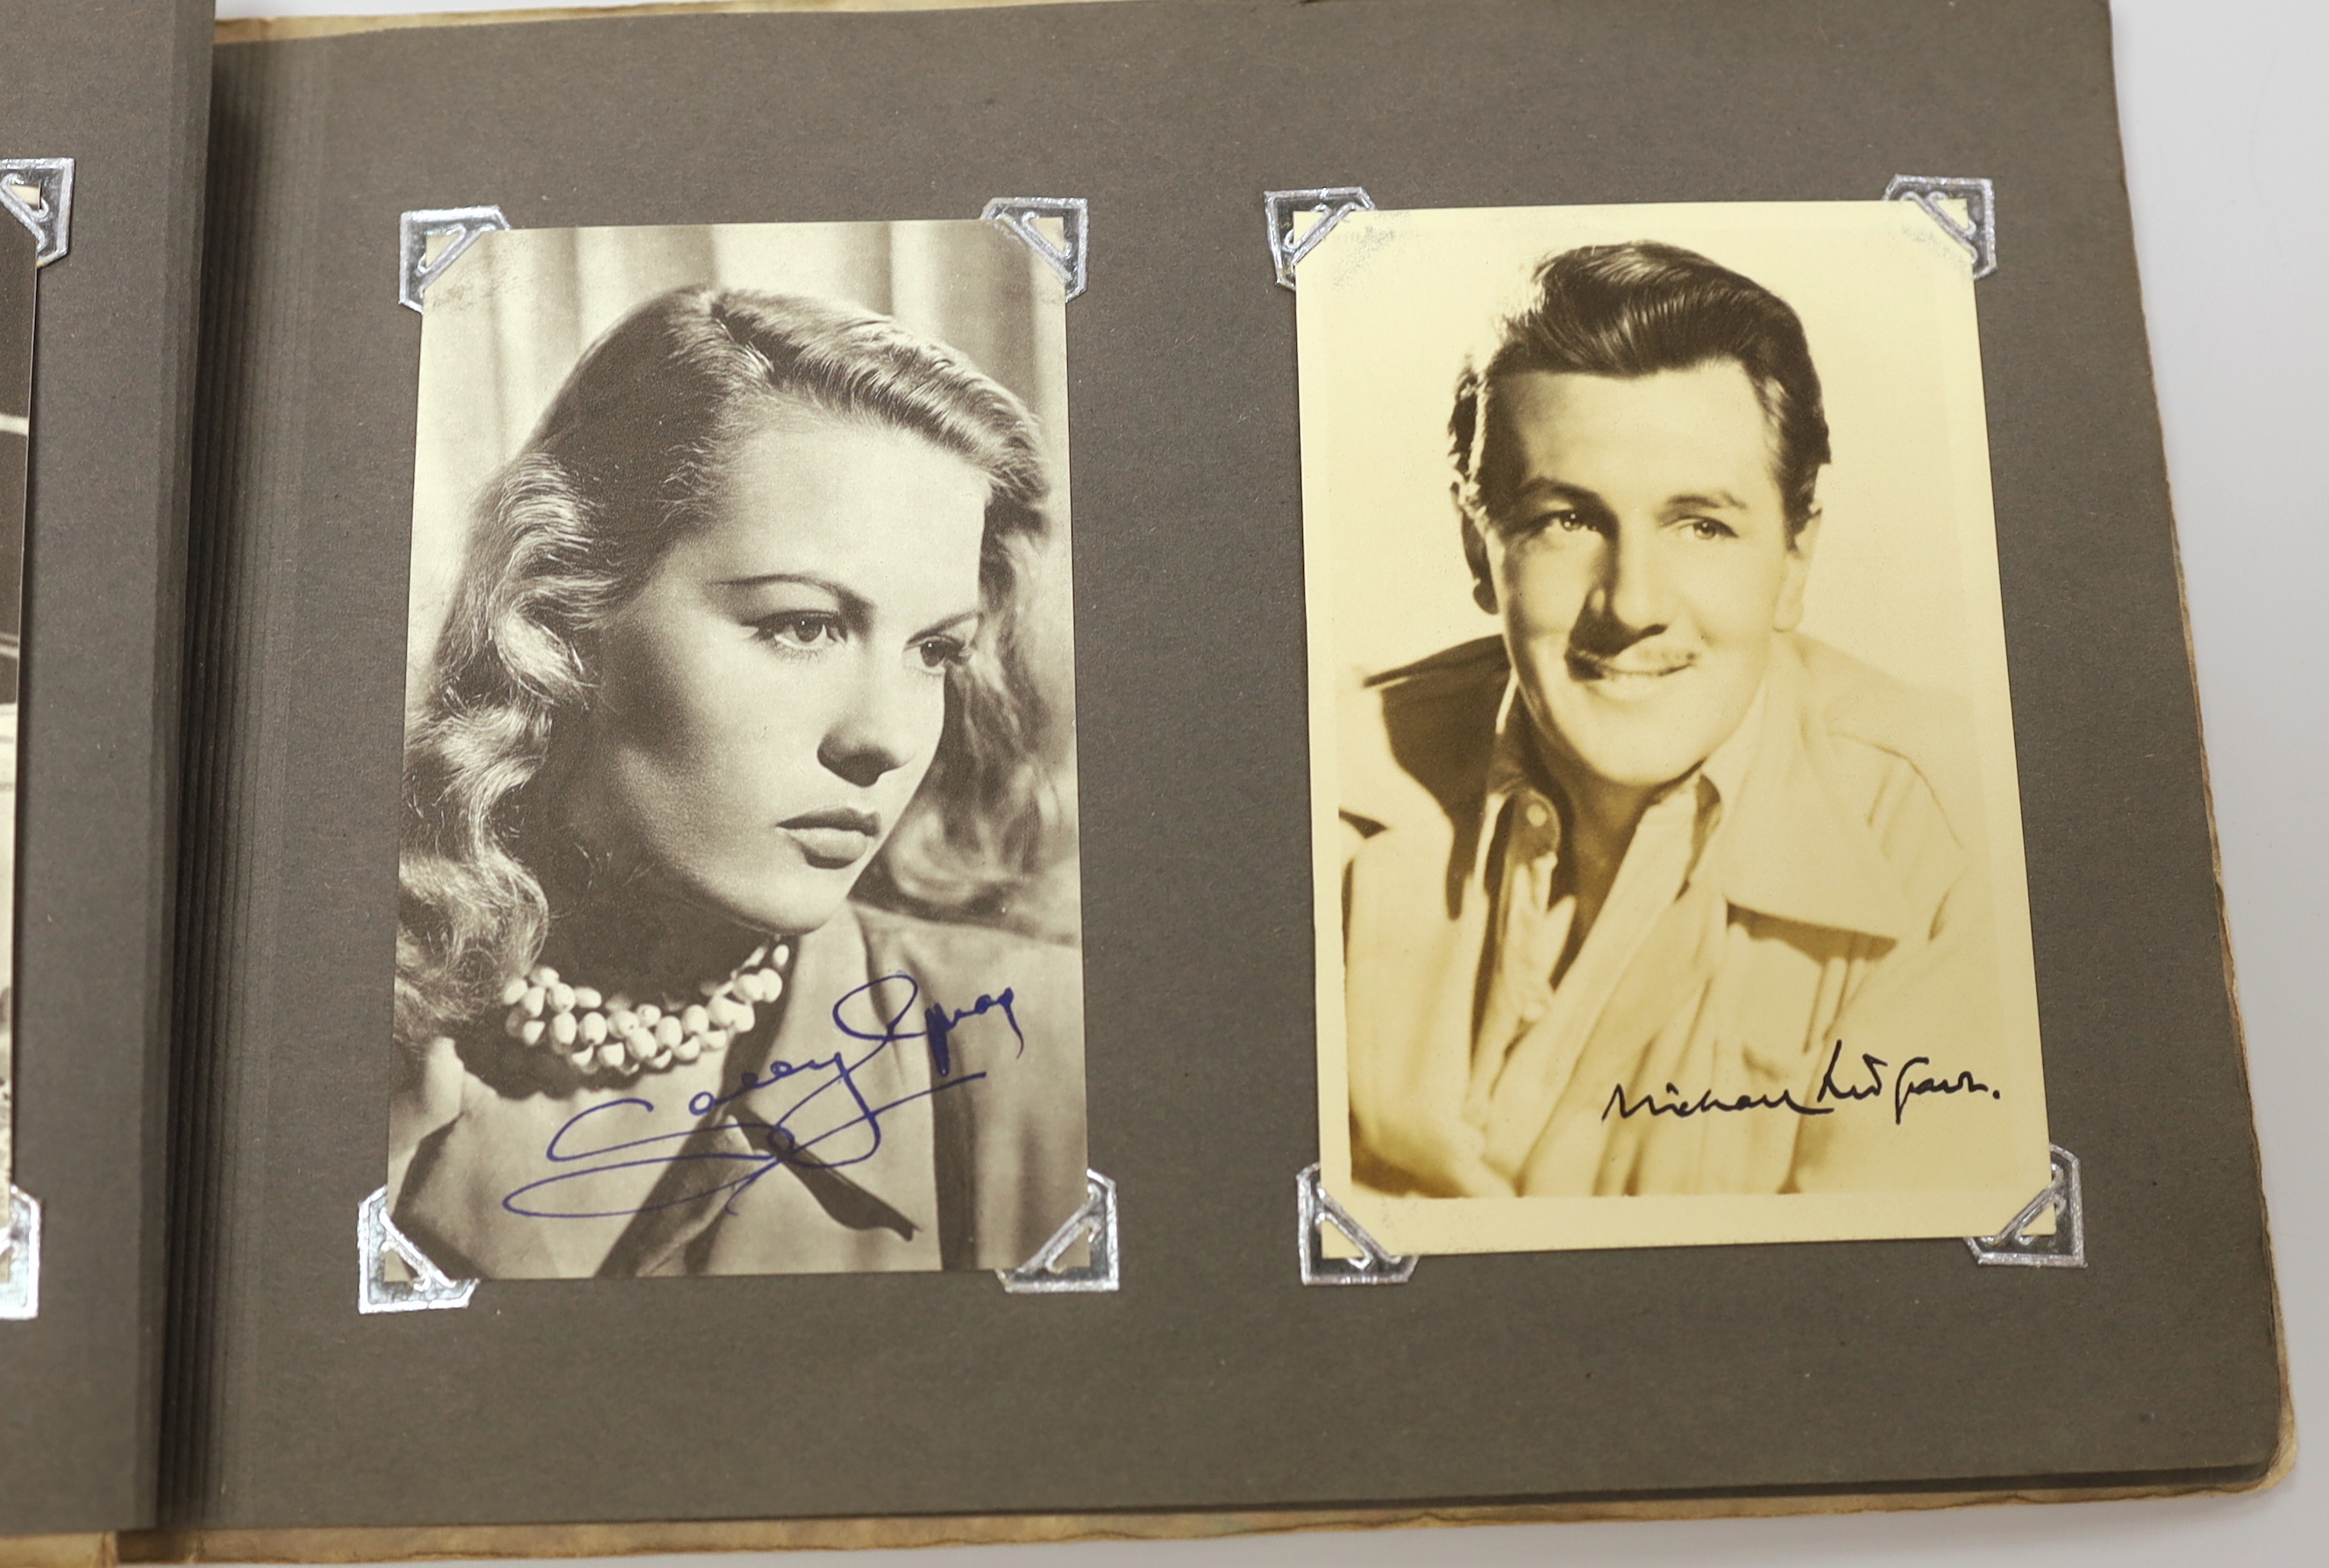 Album of photos of matinee stars and actors, mostly autographed